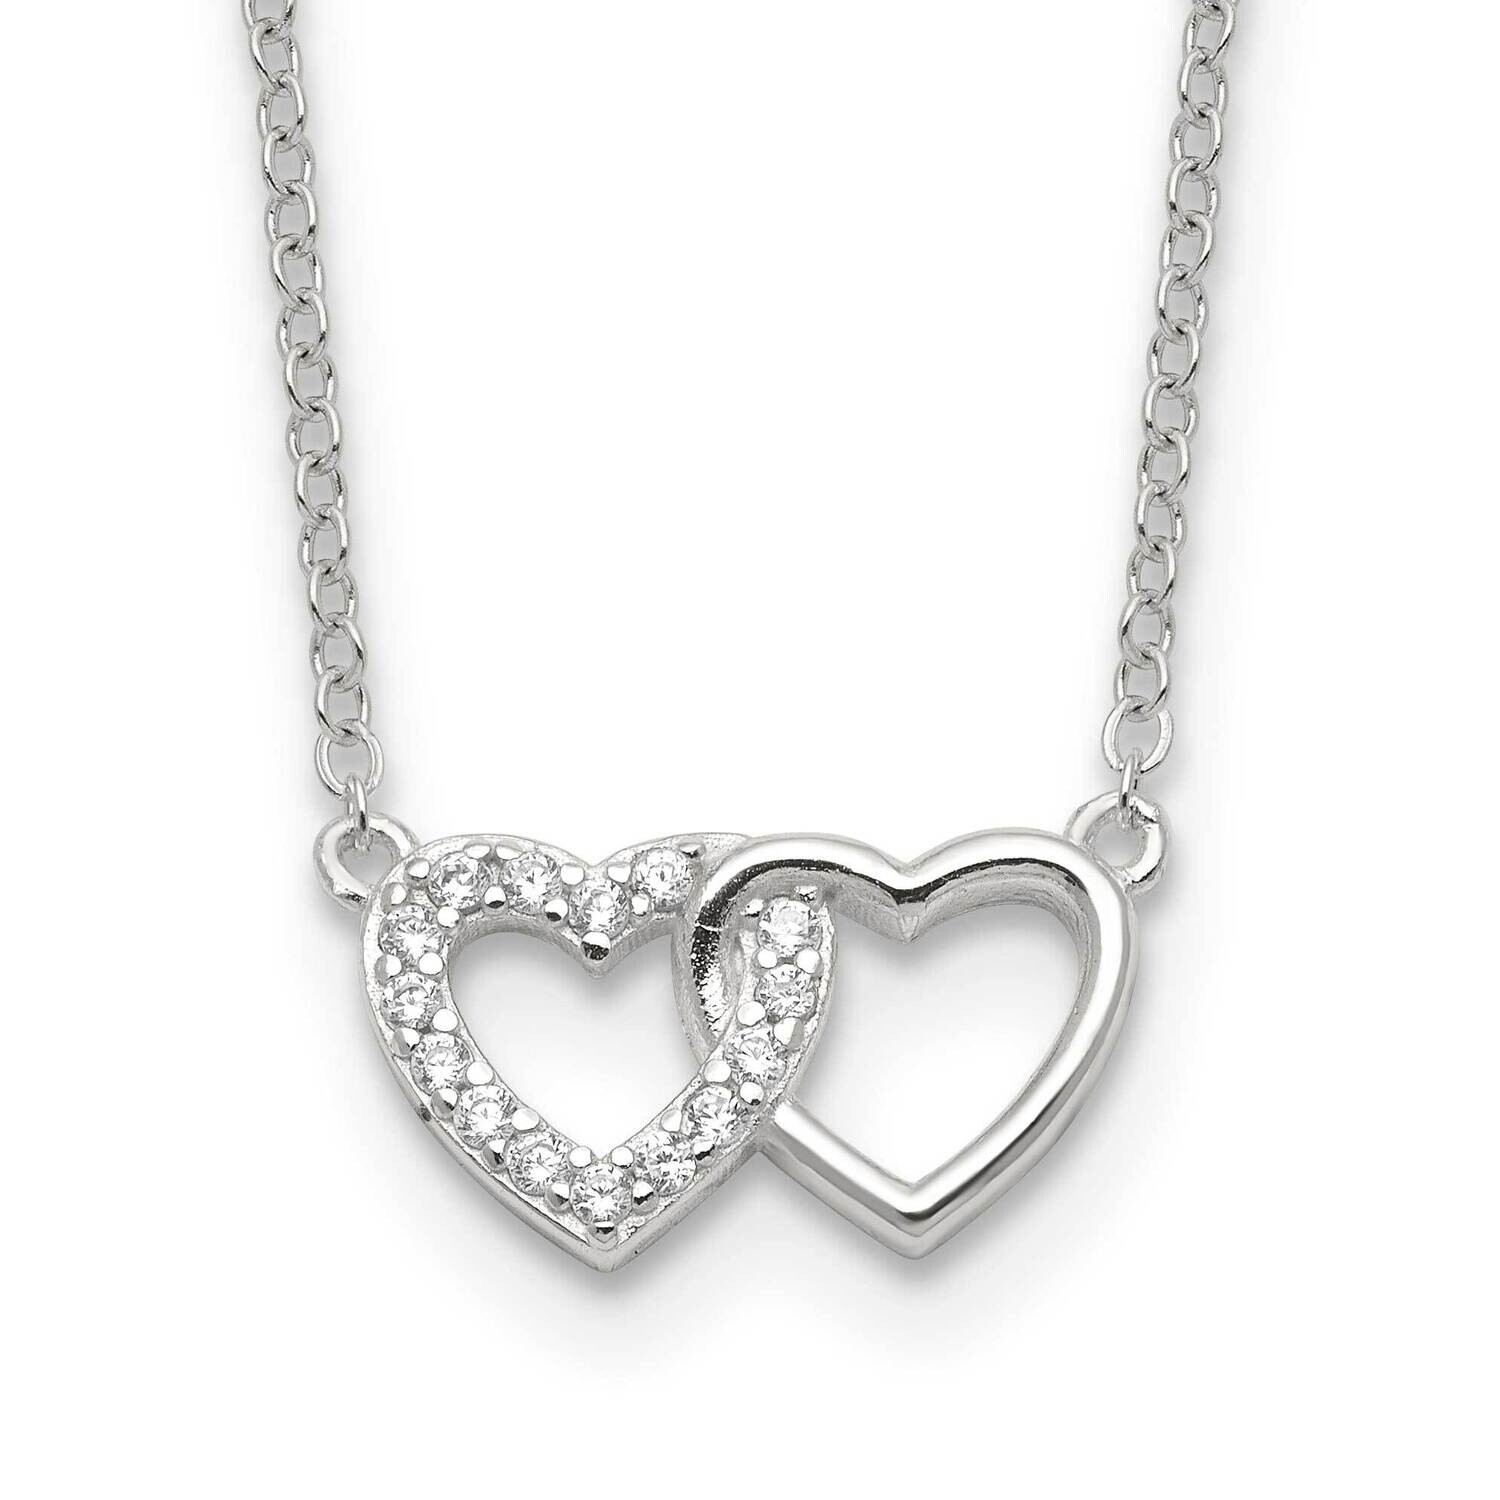 E-Coating CZ Double Heart 16 Inch 2 Inch Extension Necklace Sterling Silver QG6598-16